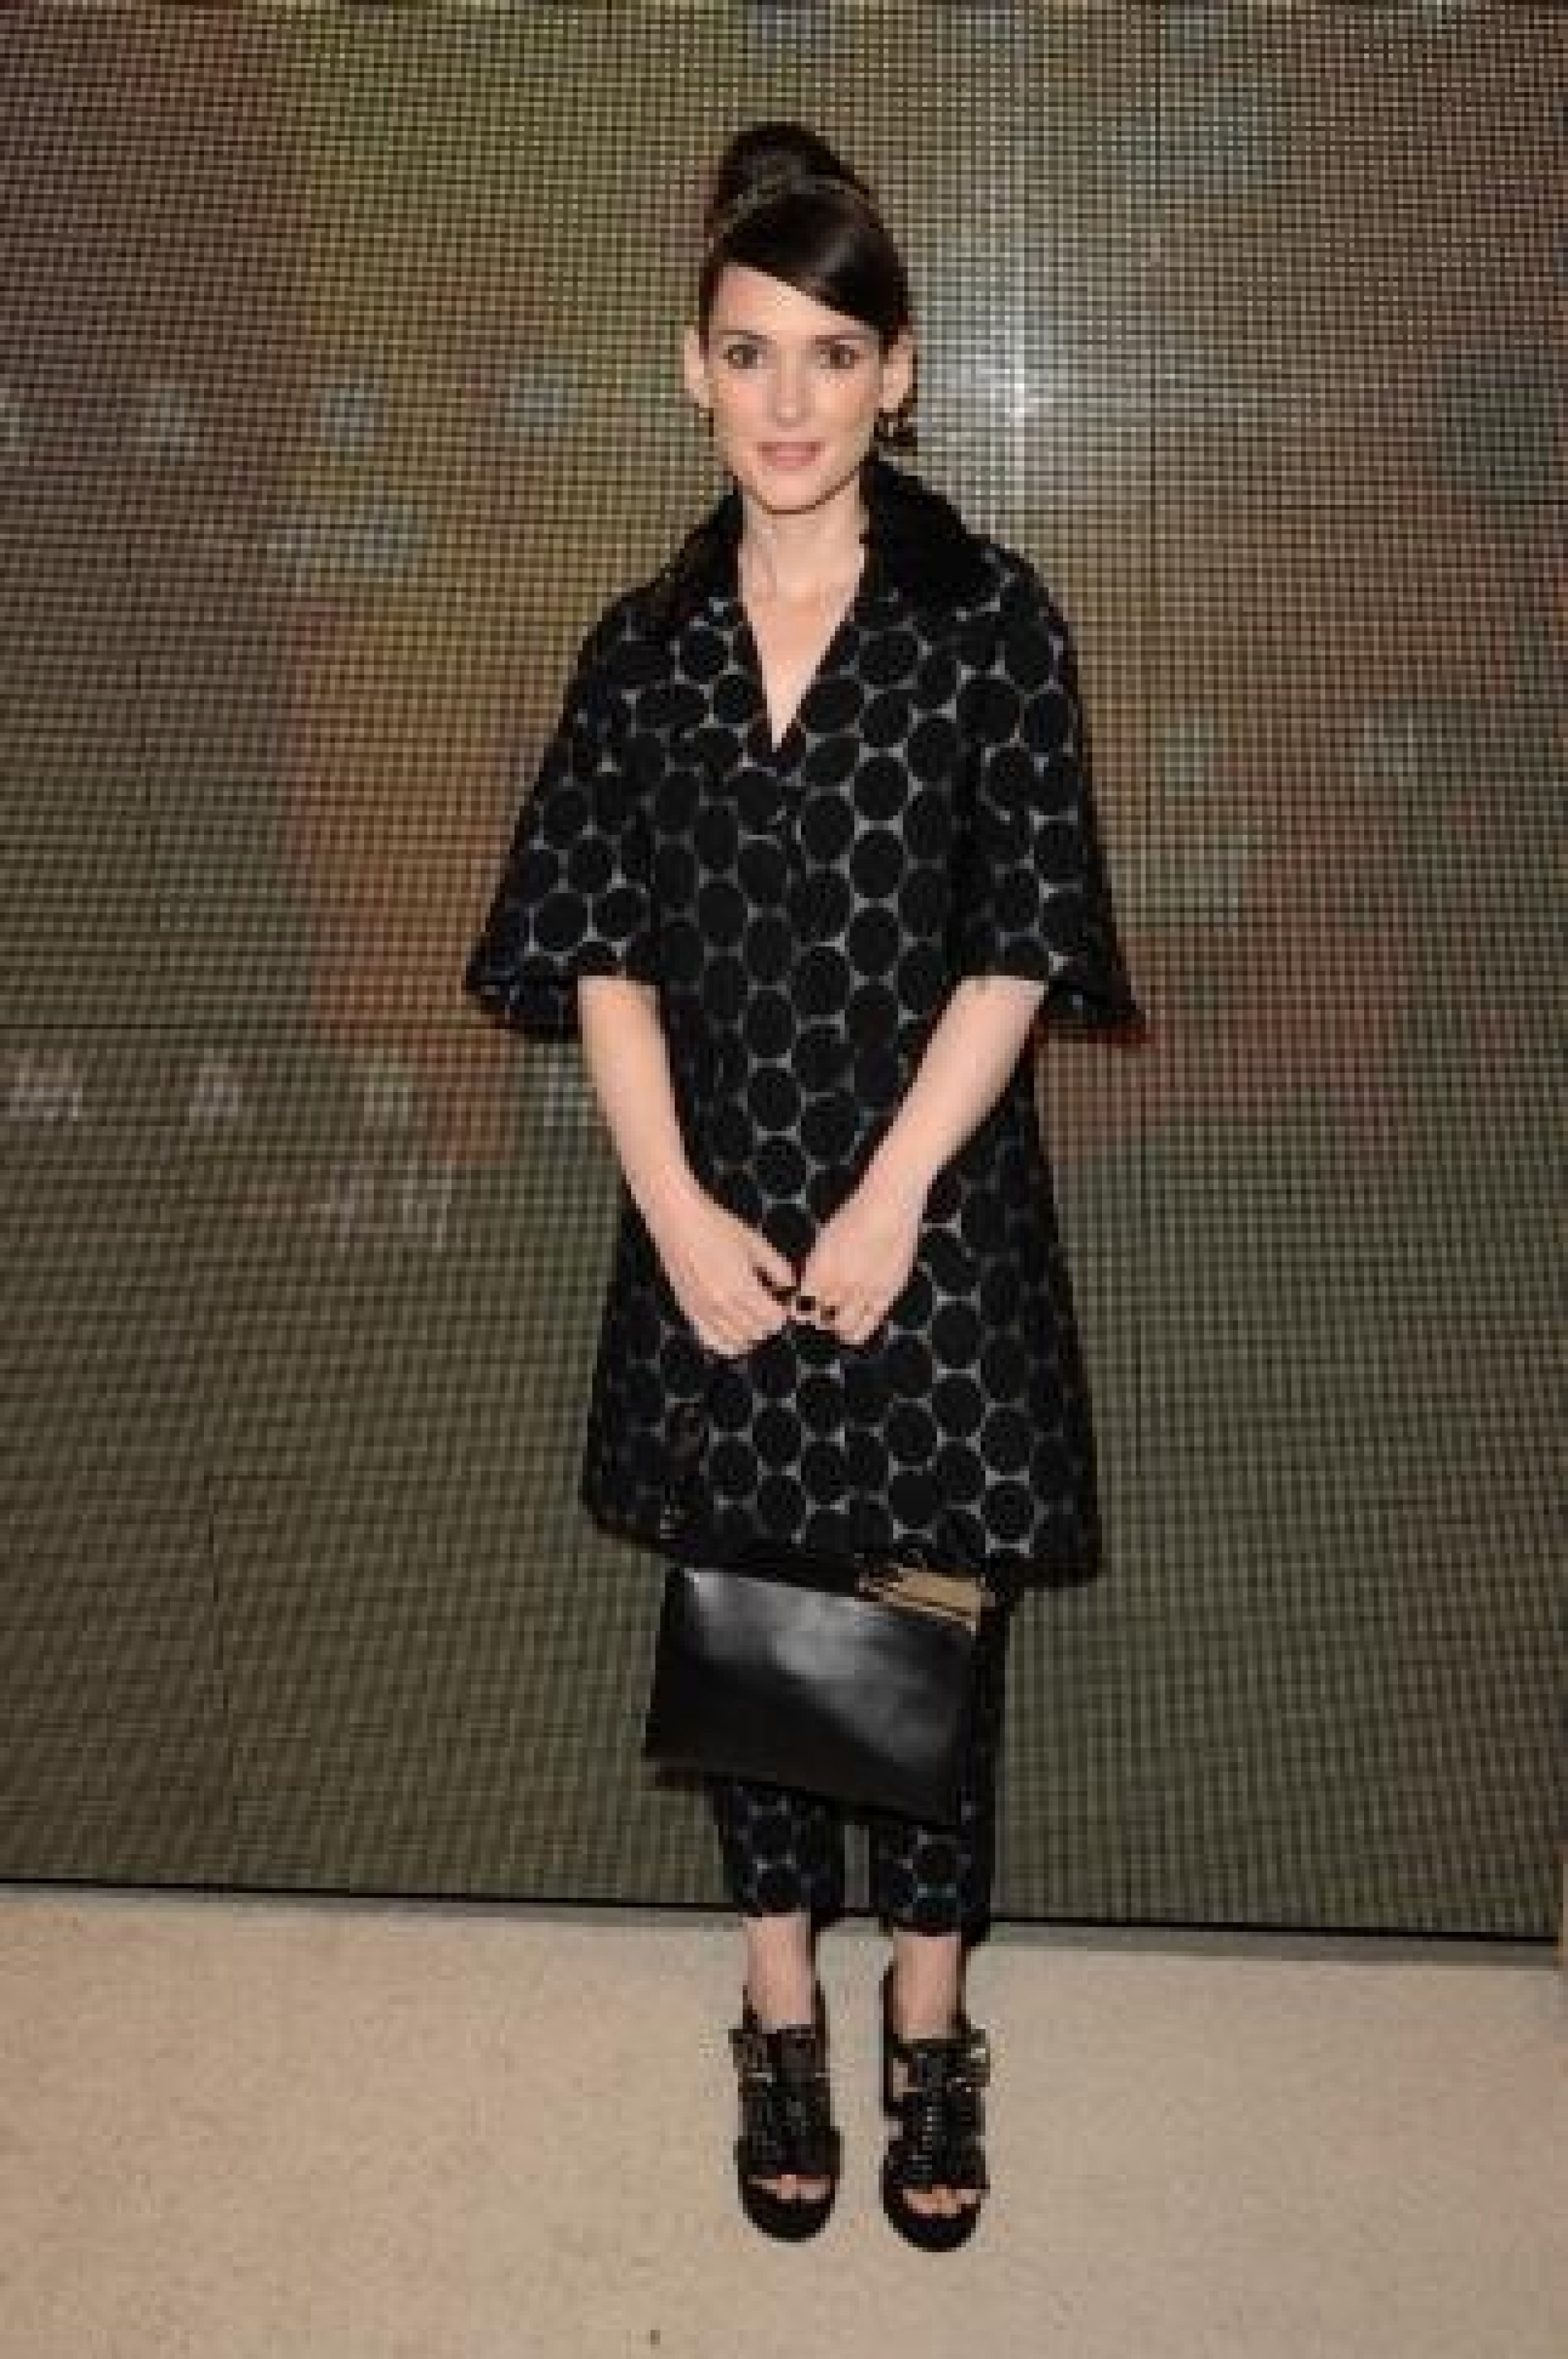 Marni for HM Bash Drew Barrymore, Lily Colllins, Freida Pinto and Others at the Event 